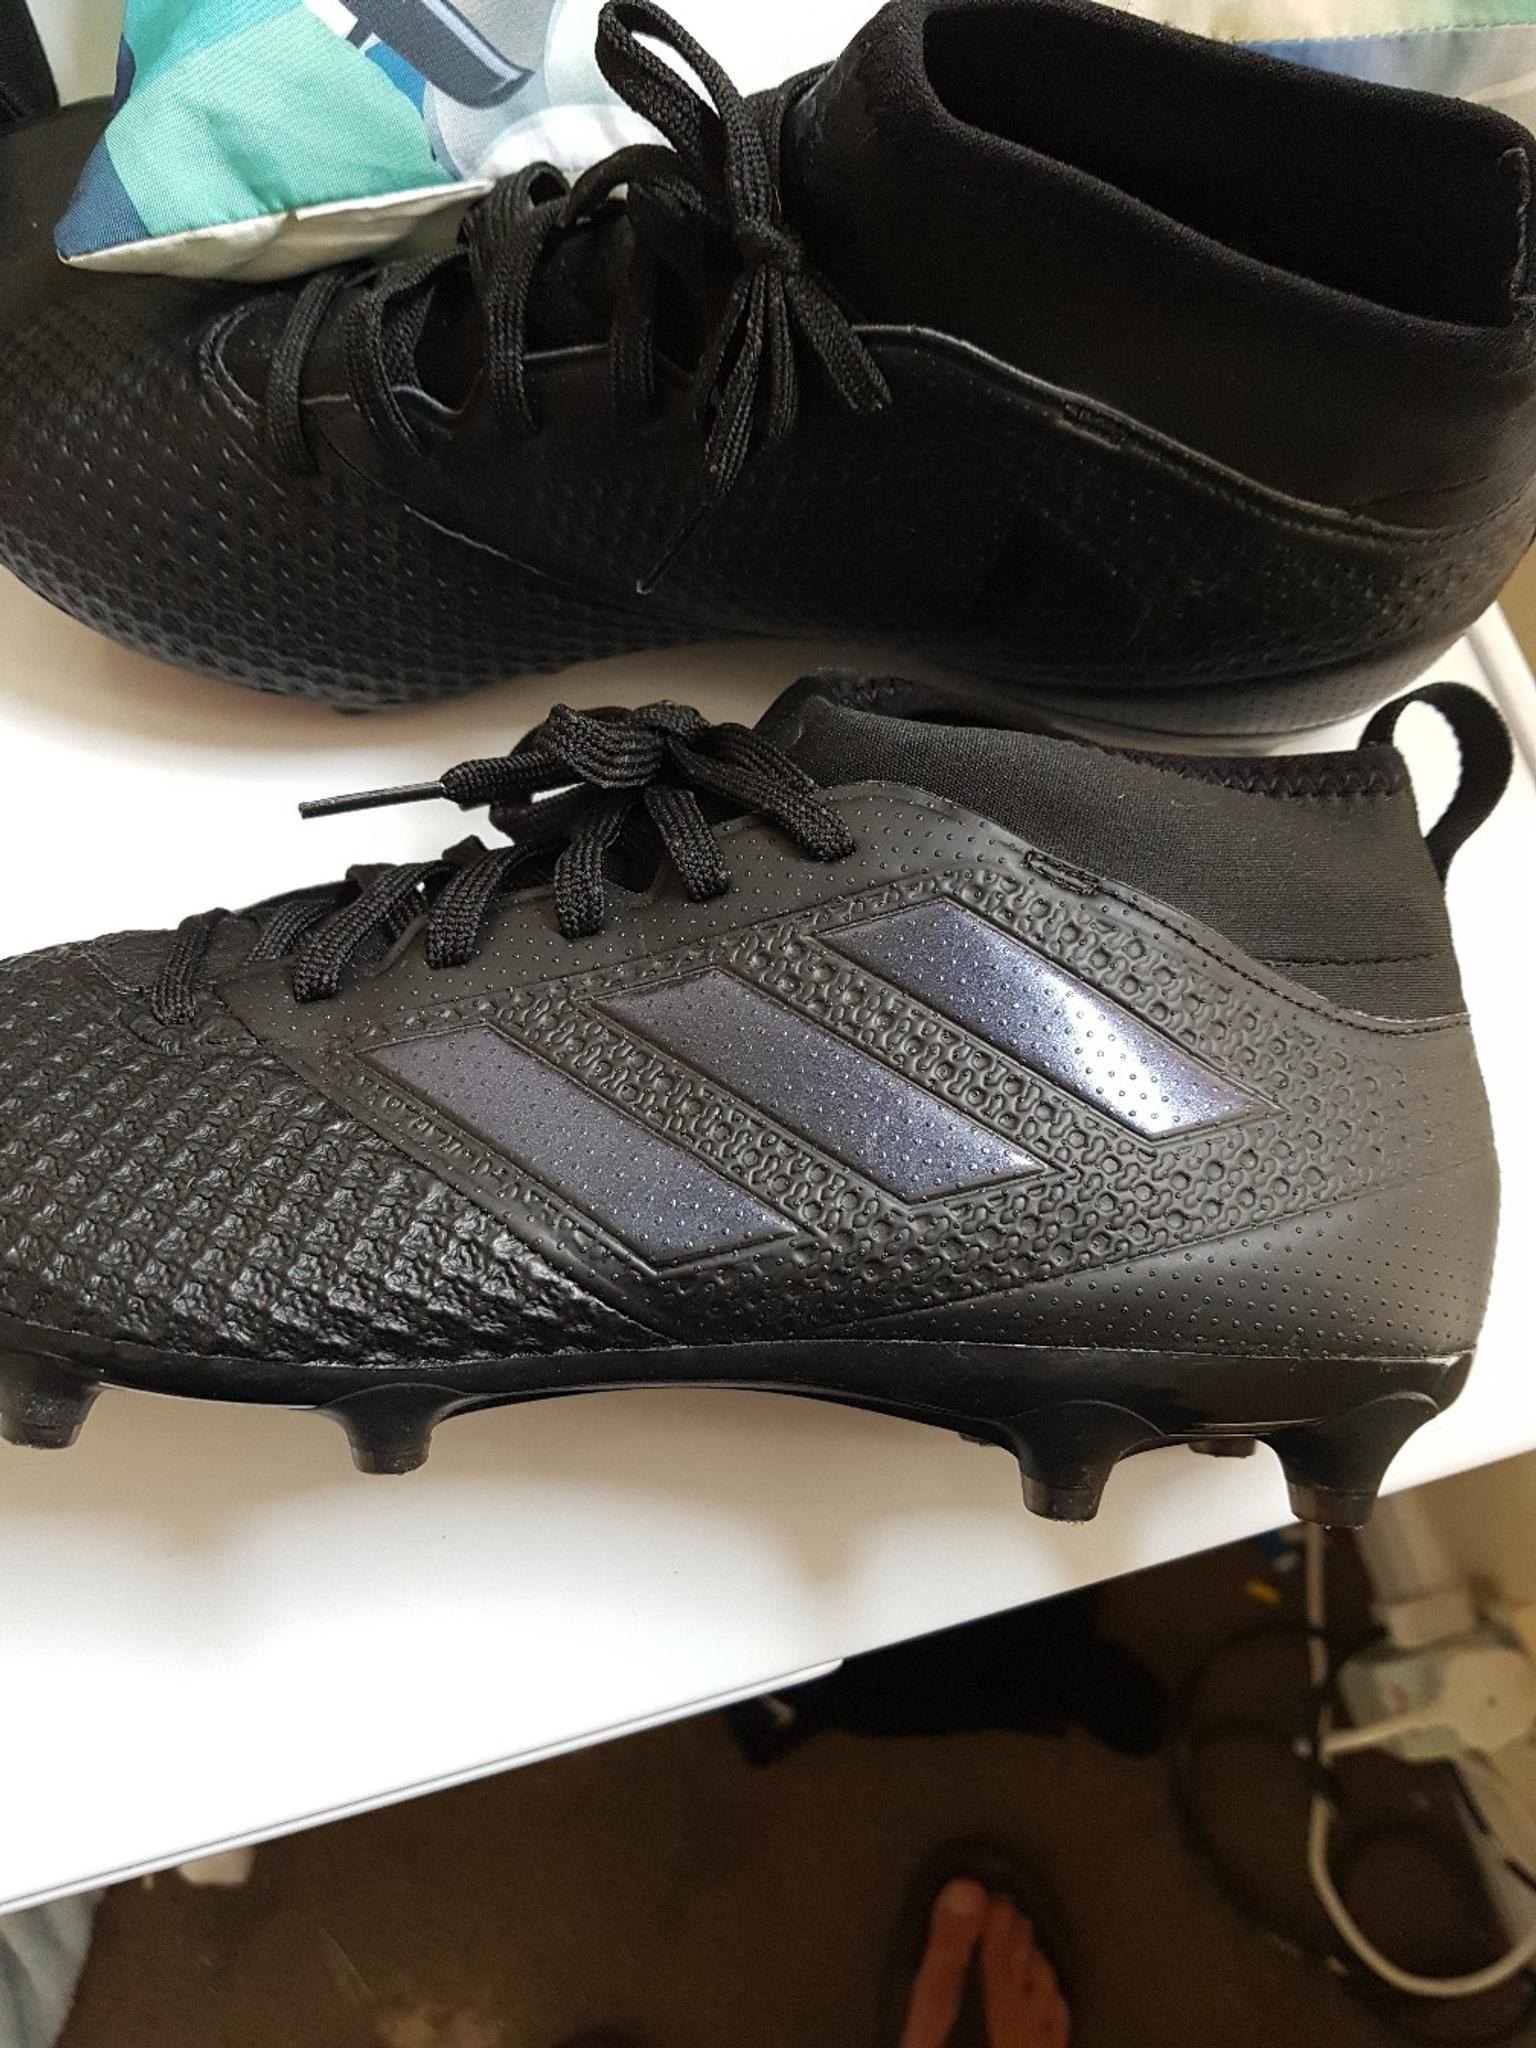 mens adidas moulded football boots